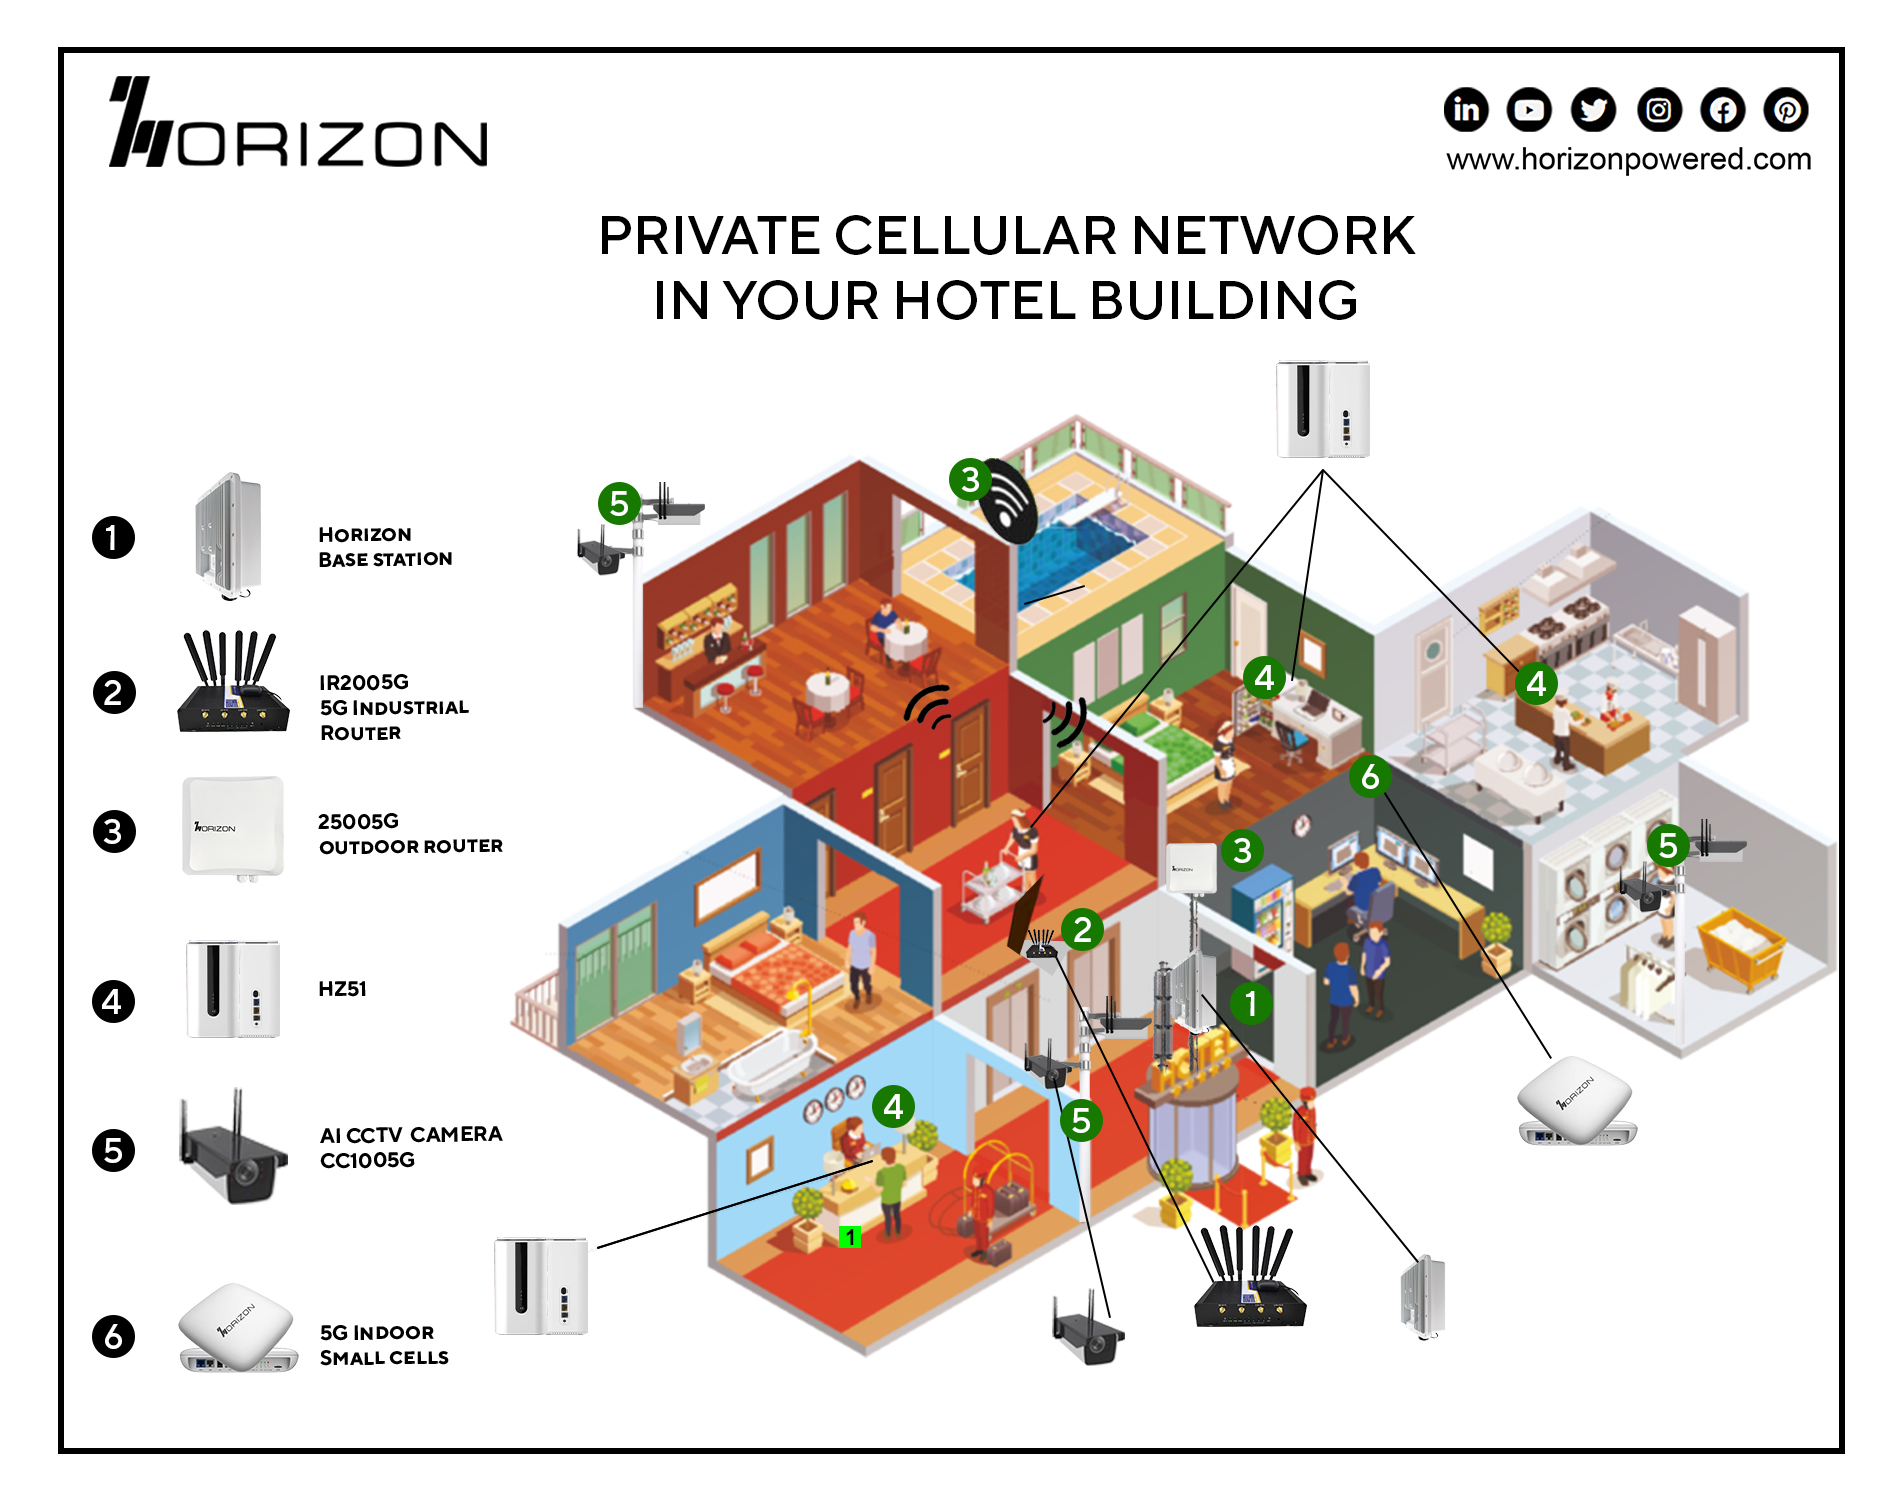 Horizon Case Study for hotels